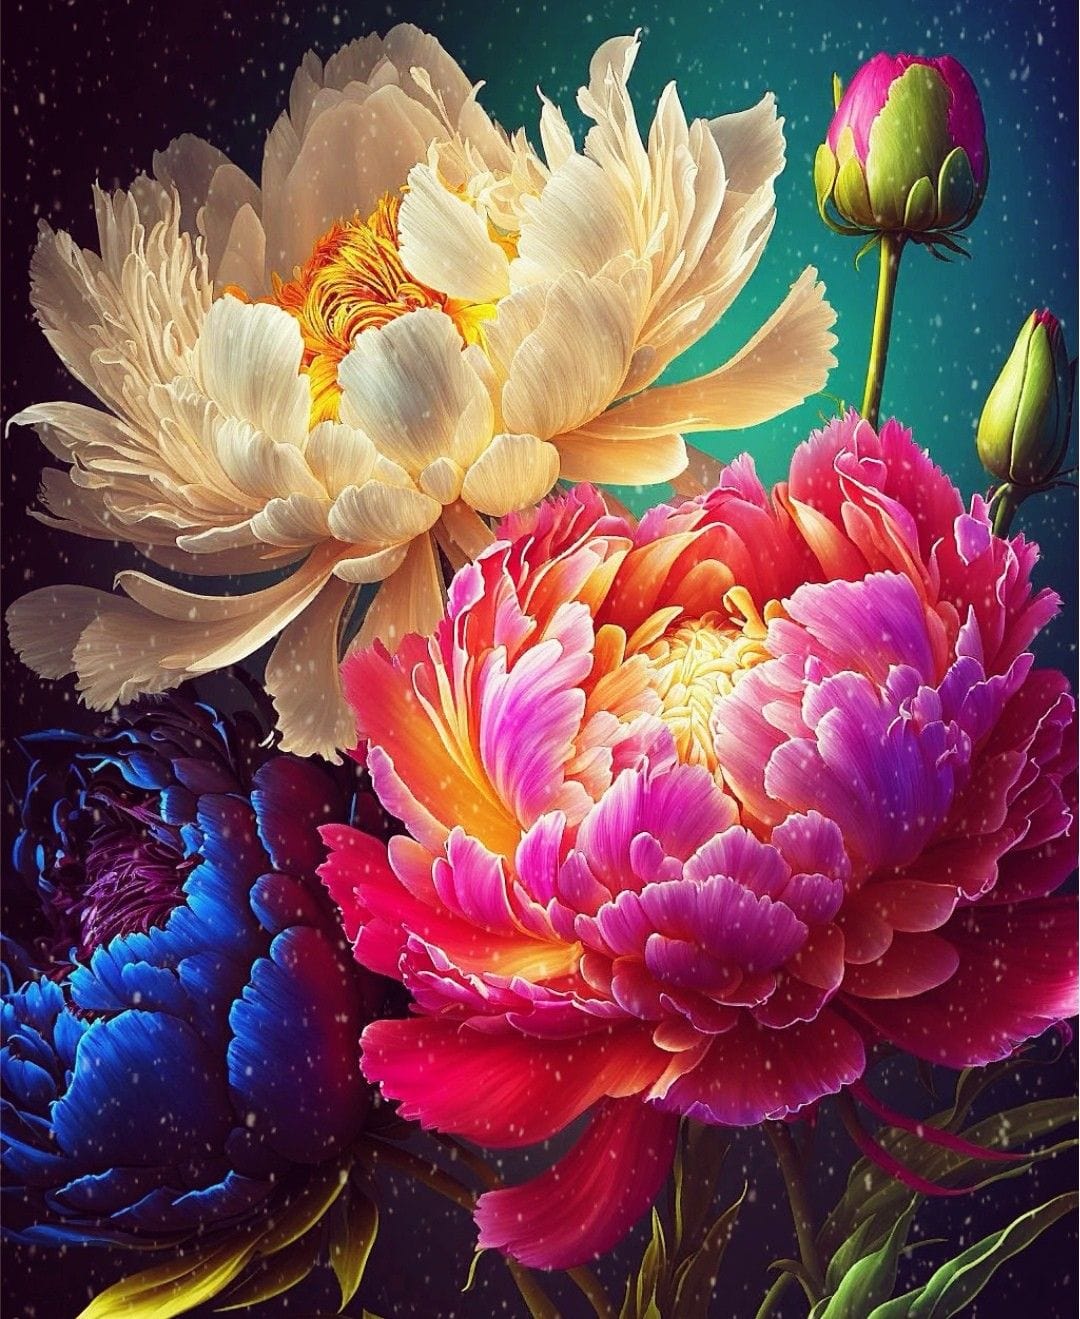 Peonies Jigsaw Puzzle, Autism Toys For Kids, Adults, Whimsical Jigsaw Puzzle